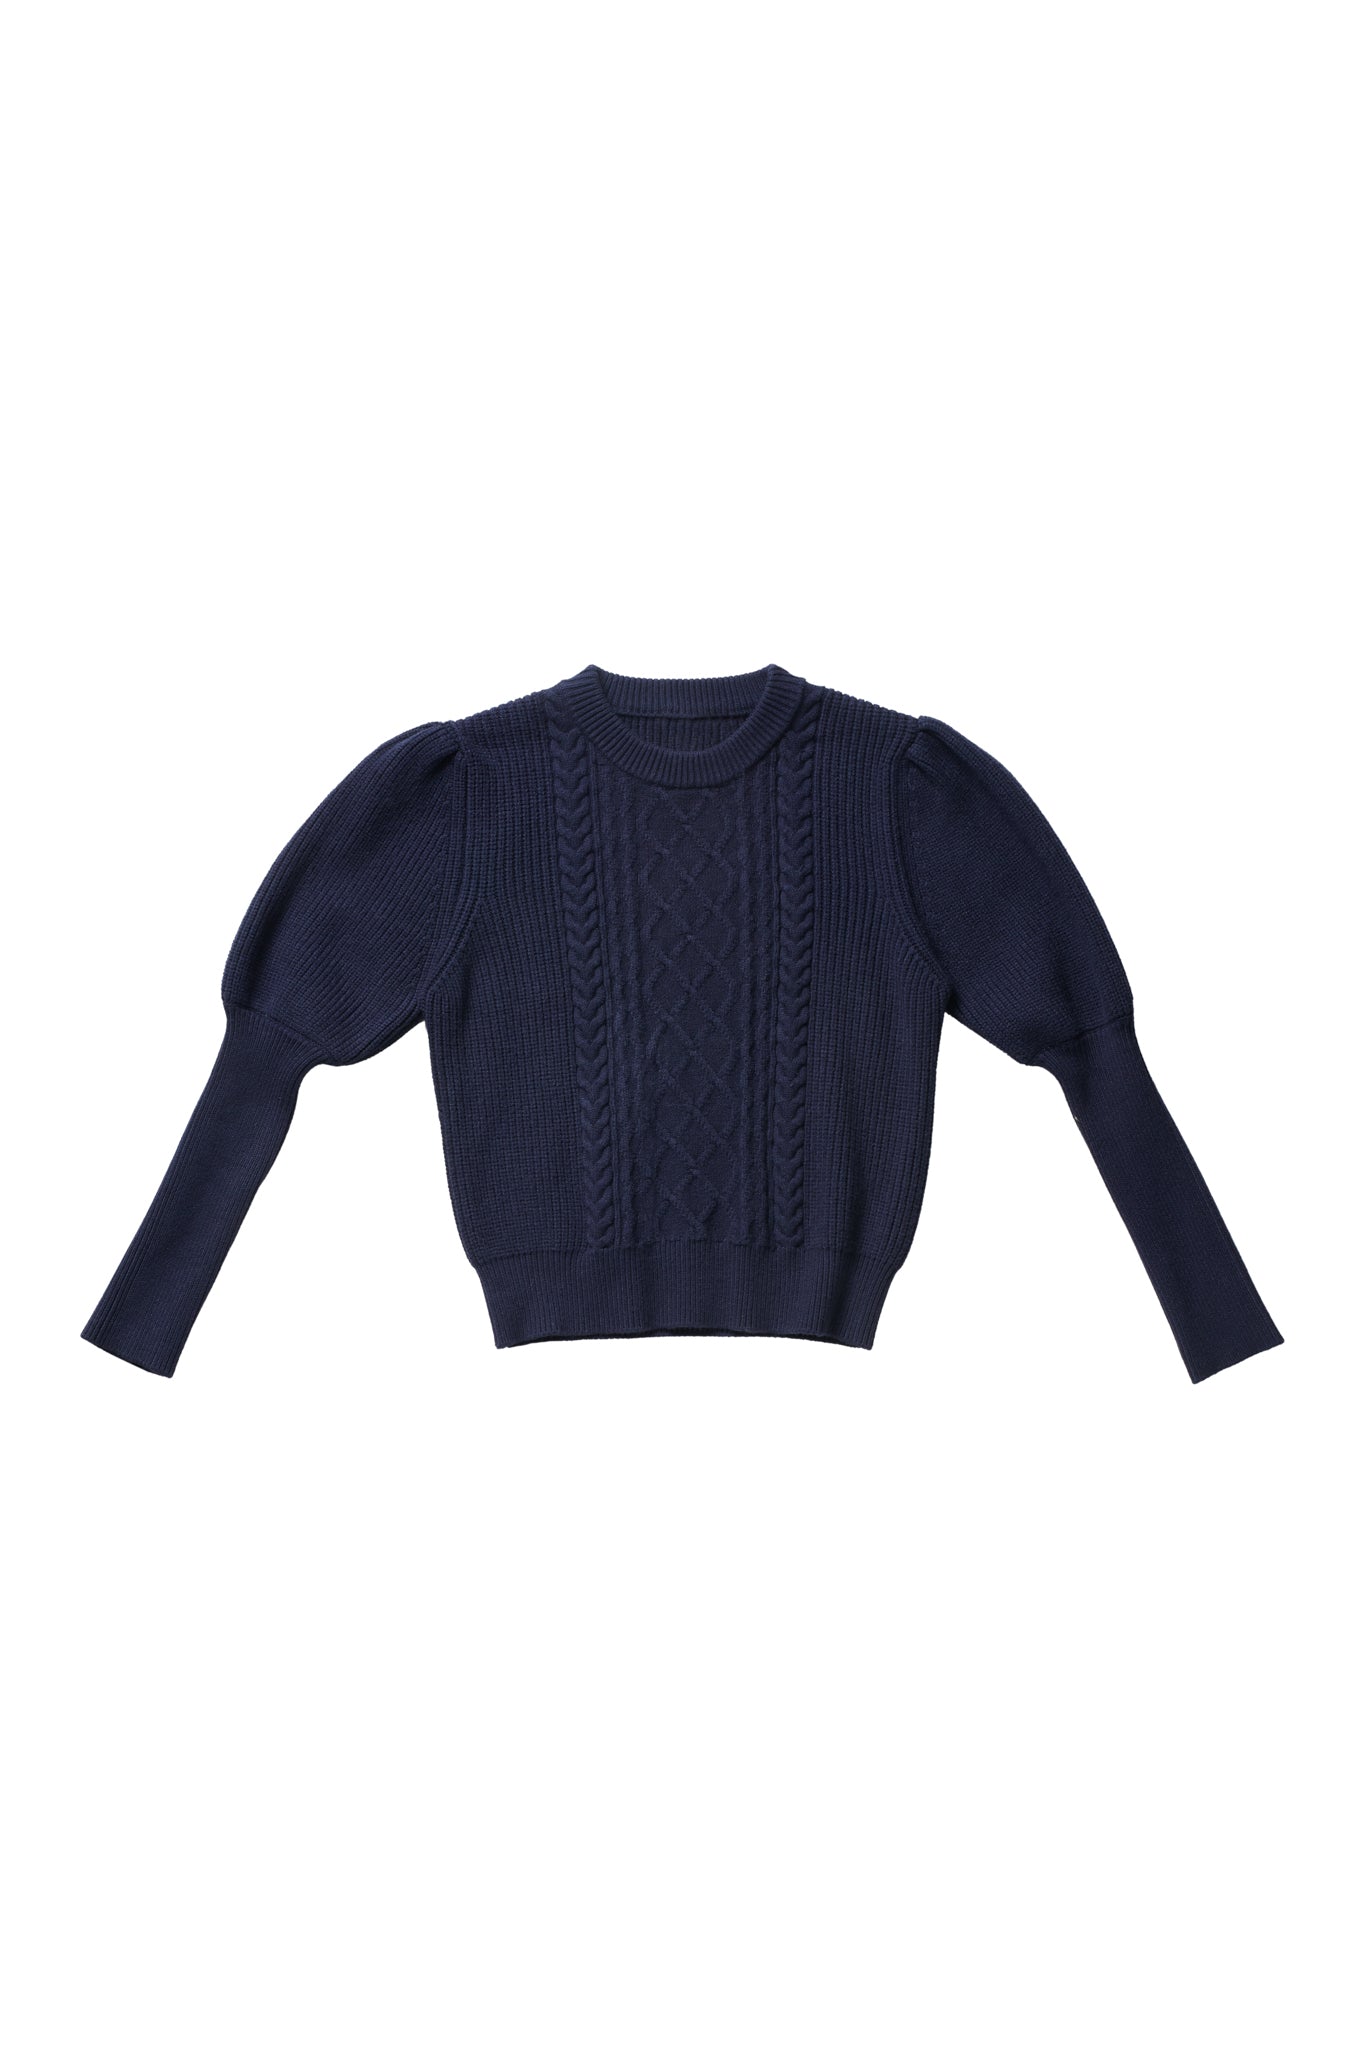 Cable Knit Sweater in Navy #8136